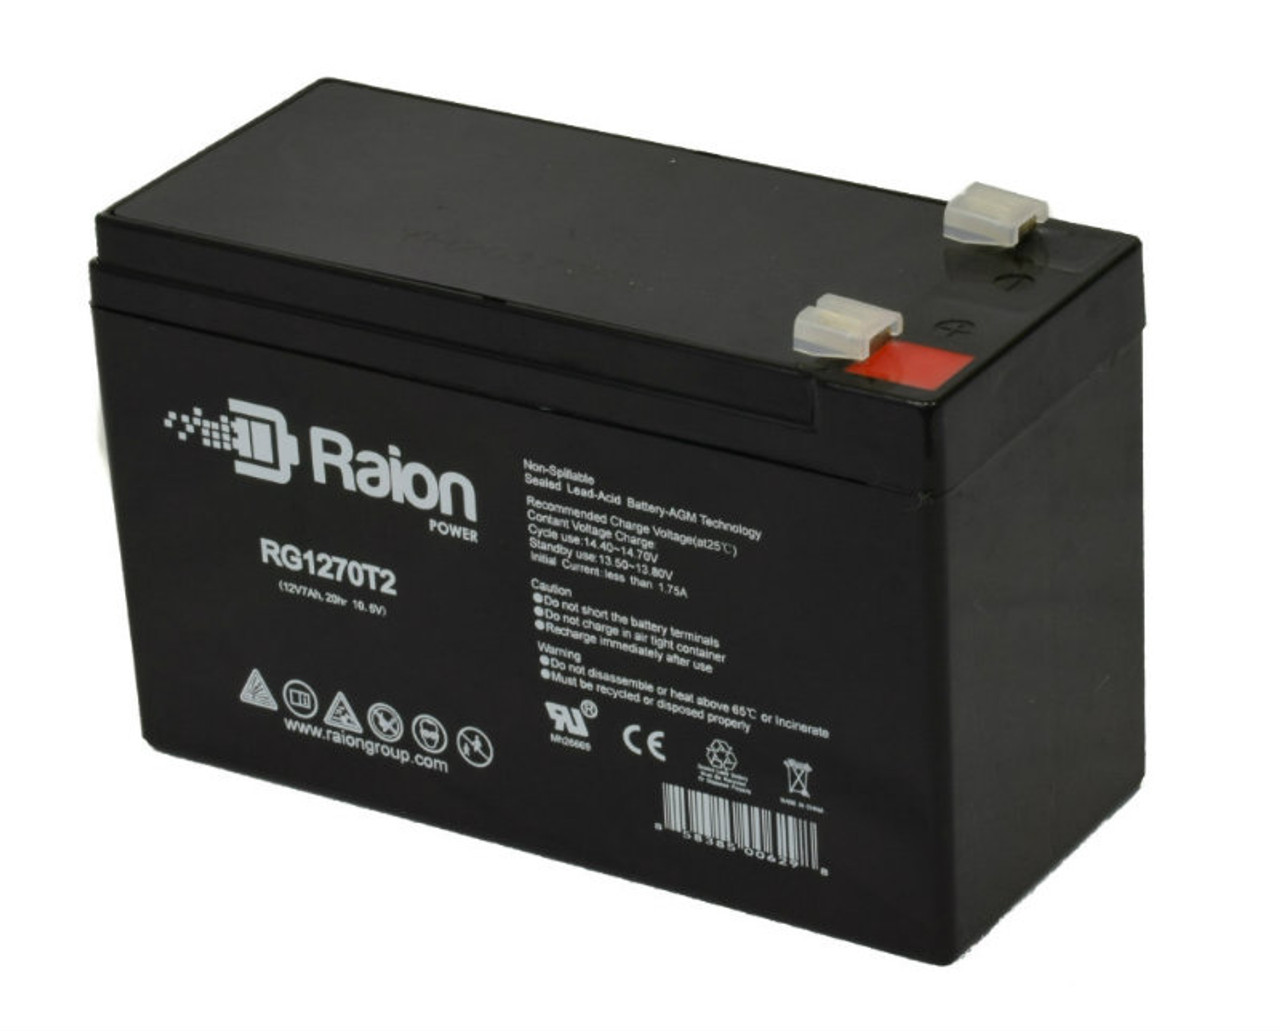 Raion Power Replacement 12V 7Ah RG1270T1 Fire Alarm Battery for Altronix SMP7PMCTXPD4